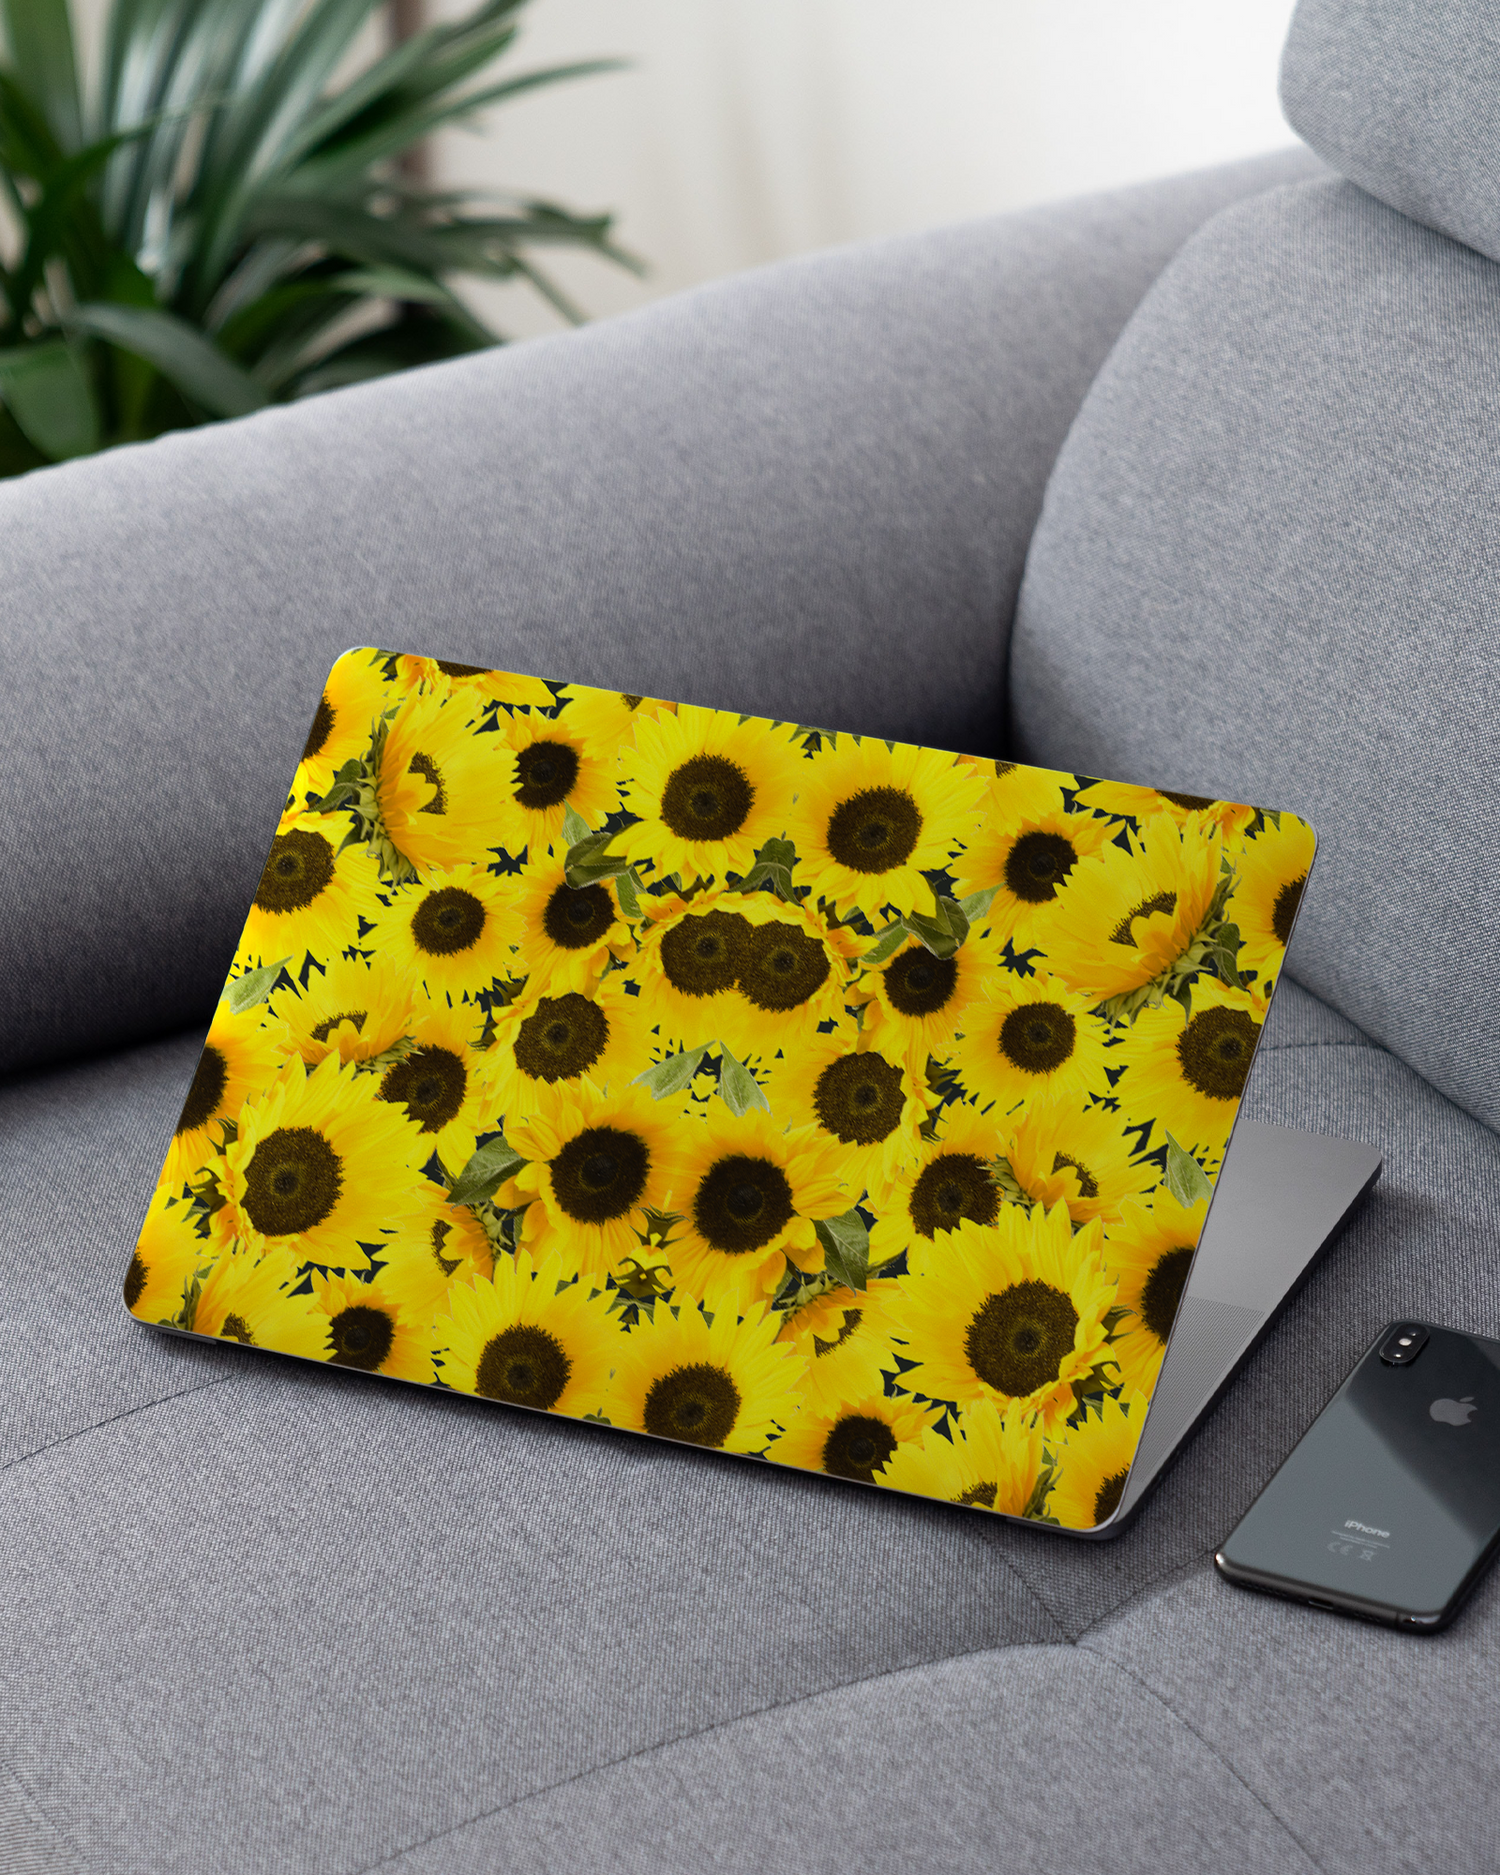 Sunflowers Laptop Skin for 13 inch Apple MacBooks on a couch